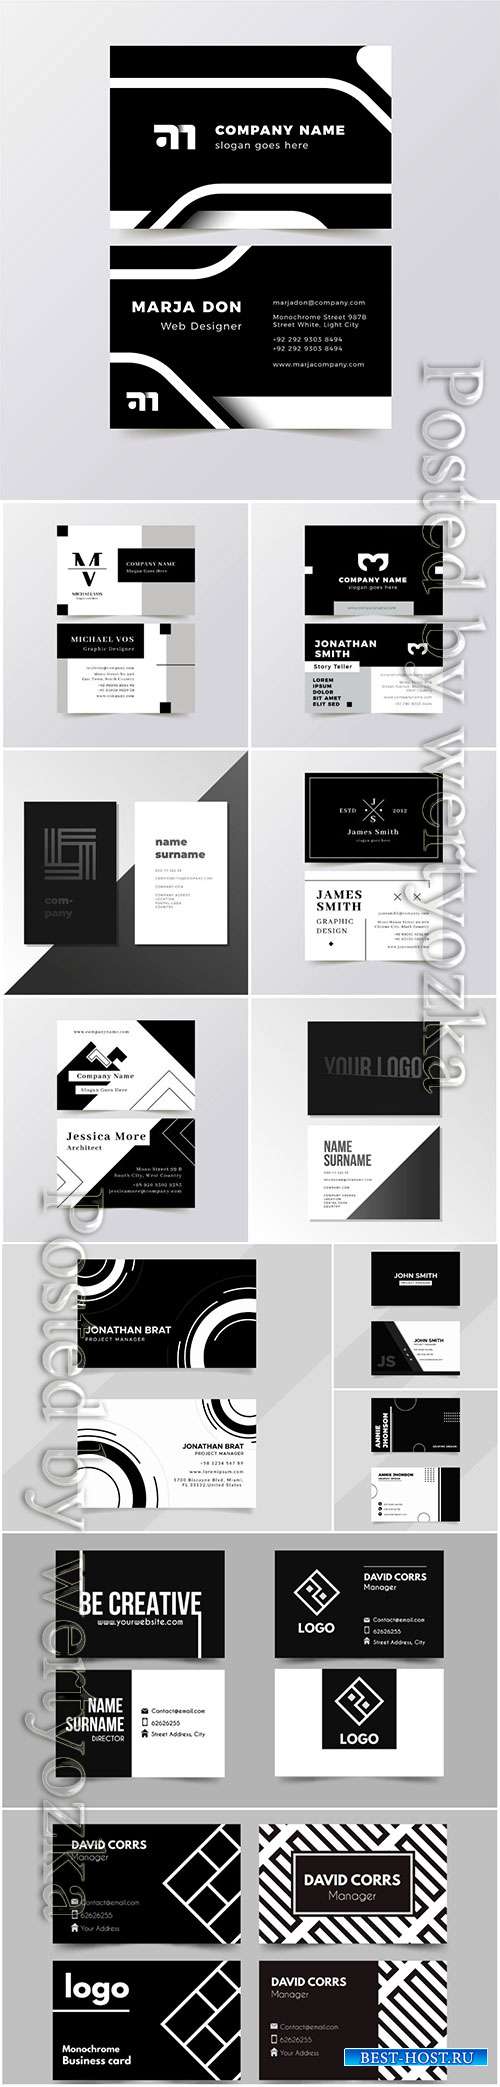 Business cards in black white style, vector templates